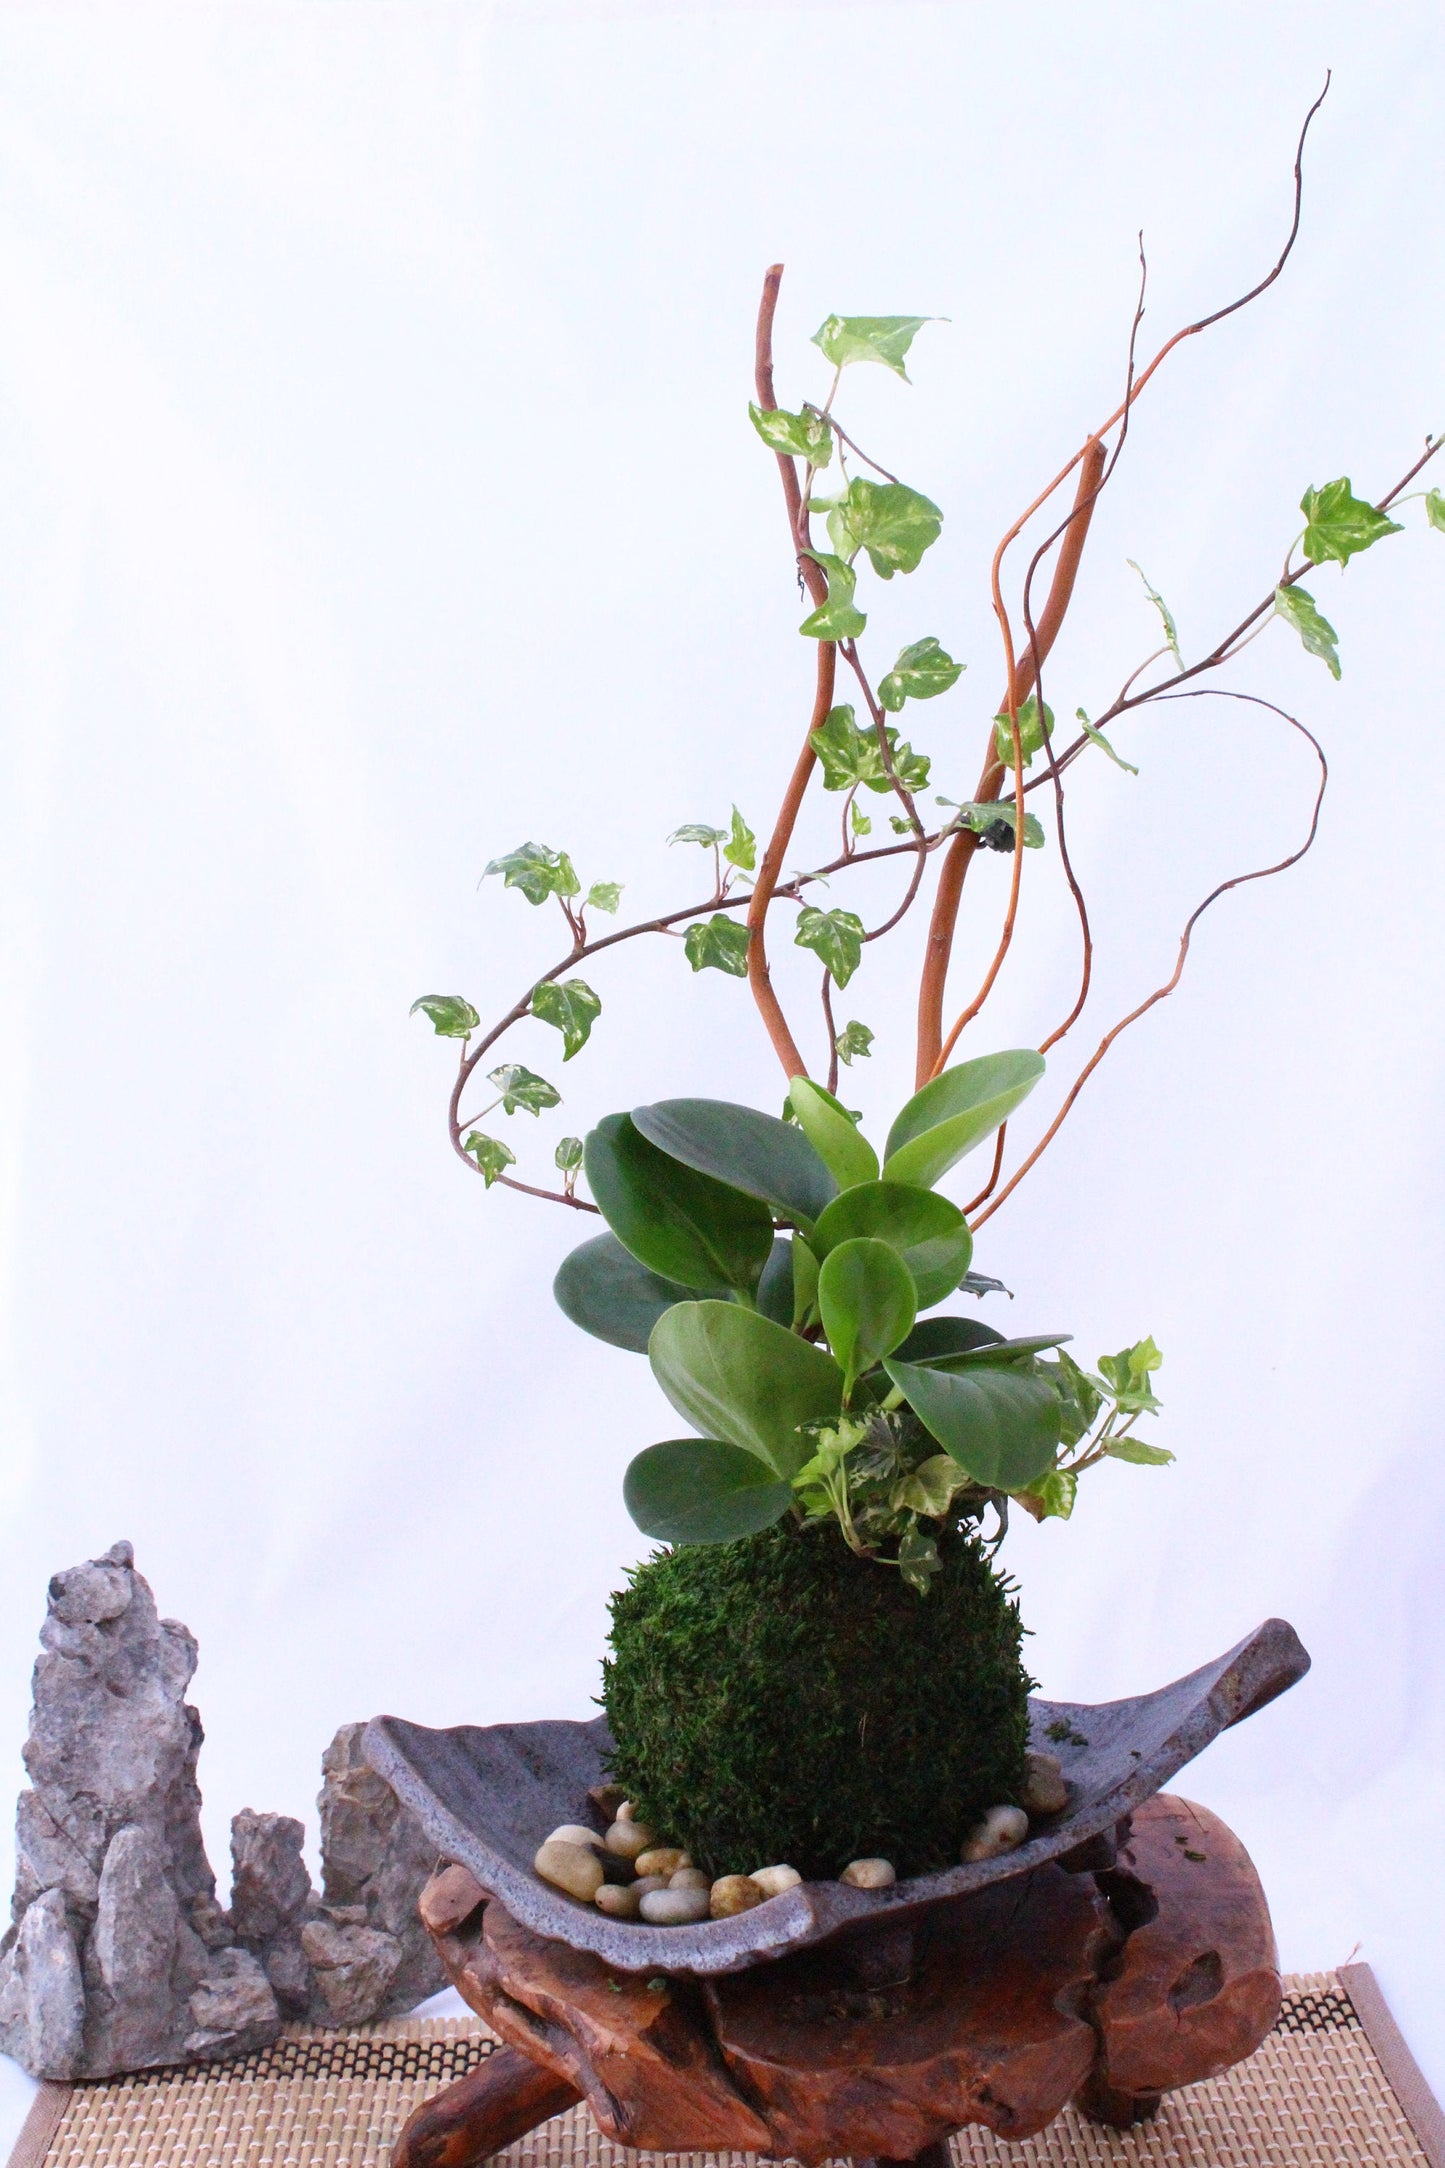 Arranged Kokedama with peperomia and ivy, Japanese traditional indoor moss ball garden